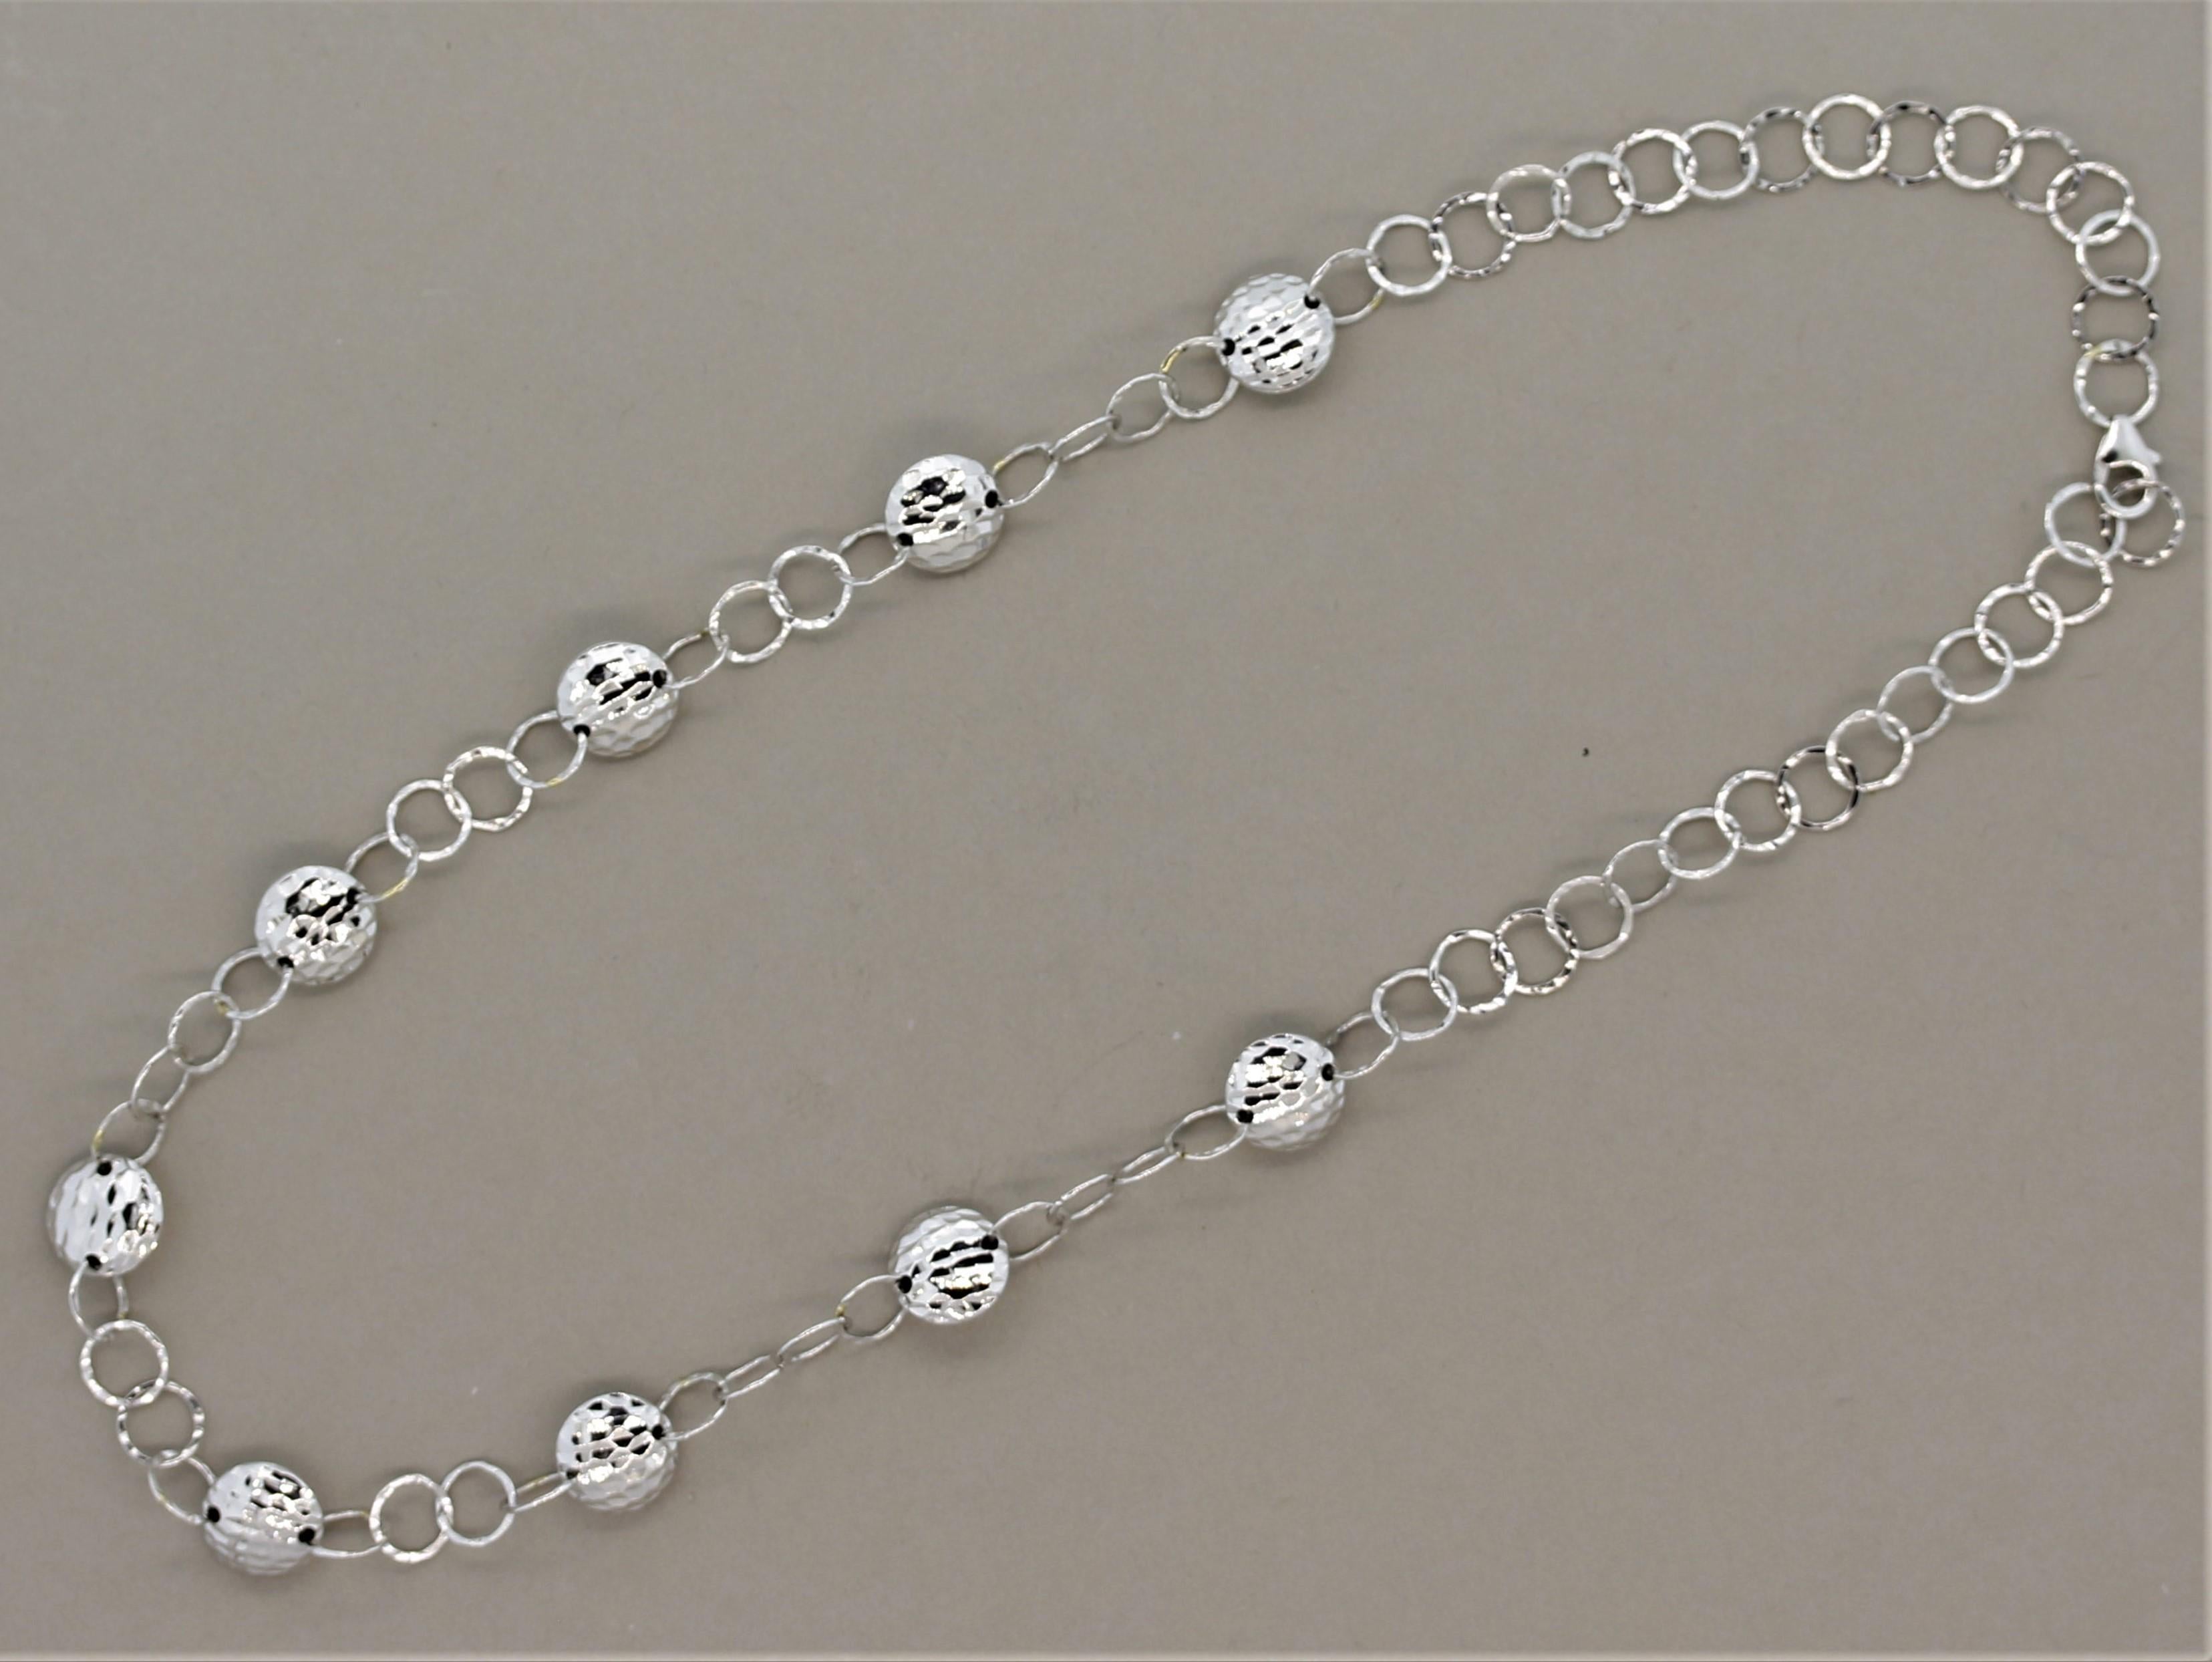 A simple yet elegant chain necklace. It is made in 18k white gold and hand worked and hammered to form rounded gold accents. They have a textured finish and a high polish giving the piece a bright shining look. Lightweight and easy to wear.

Length: